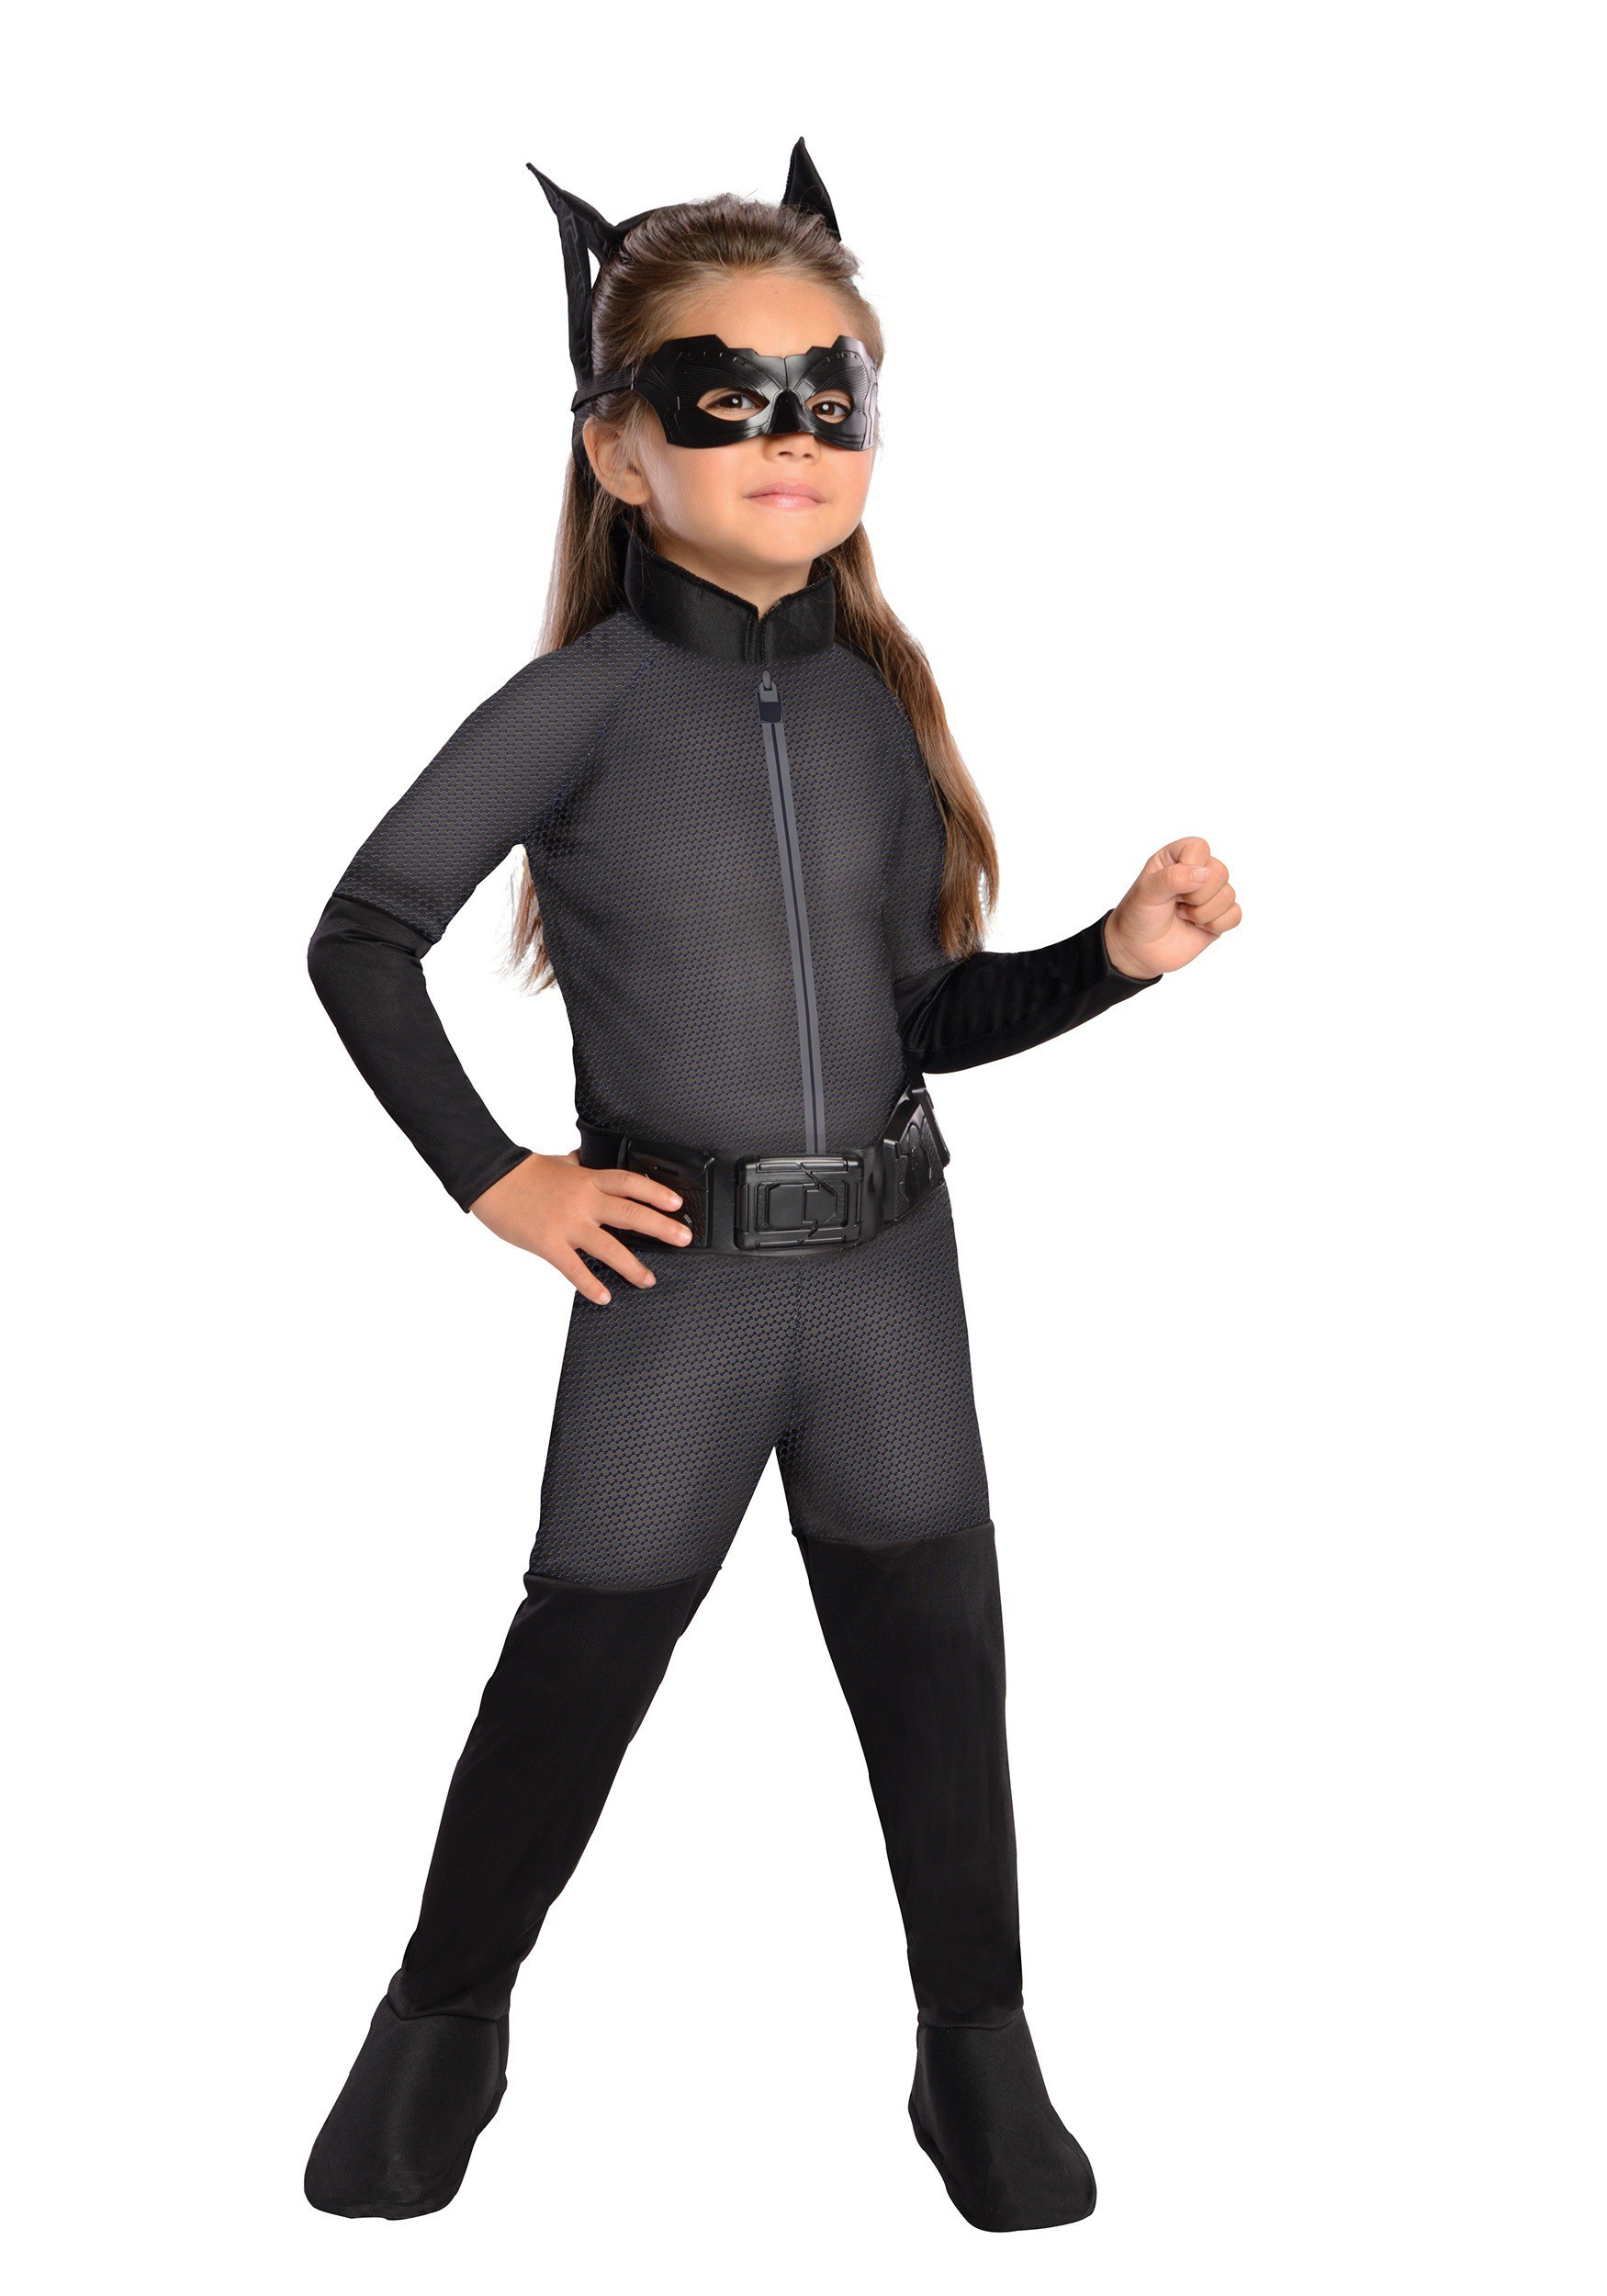 Catwoman DIY Costumes
 Toddler Catwoman Romper Costume